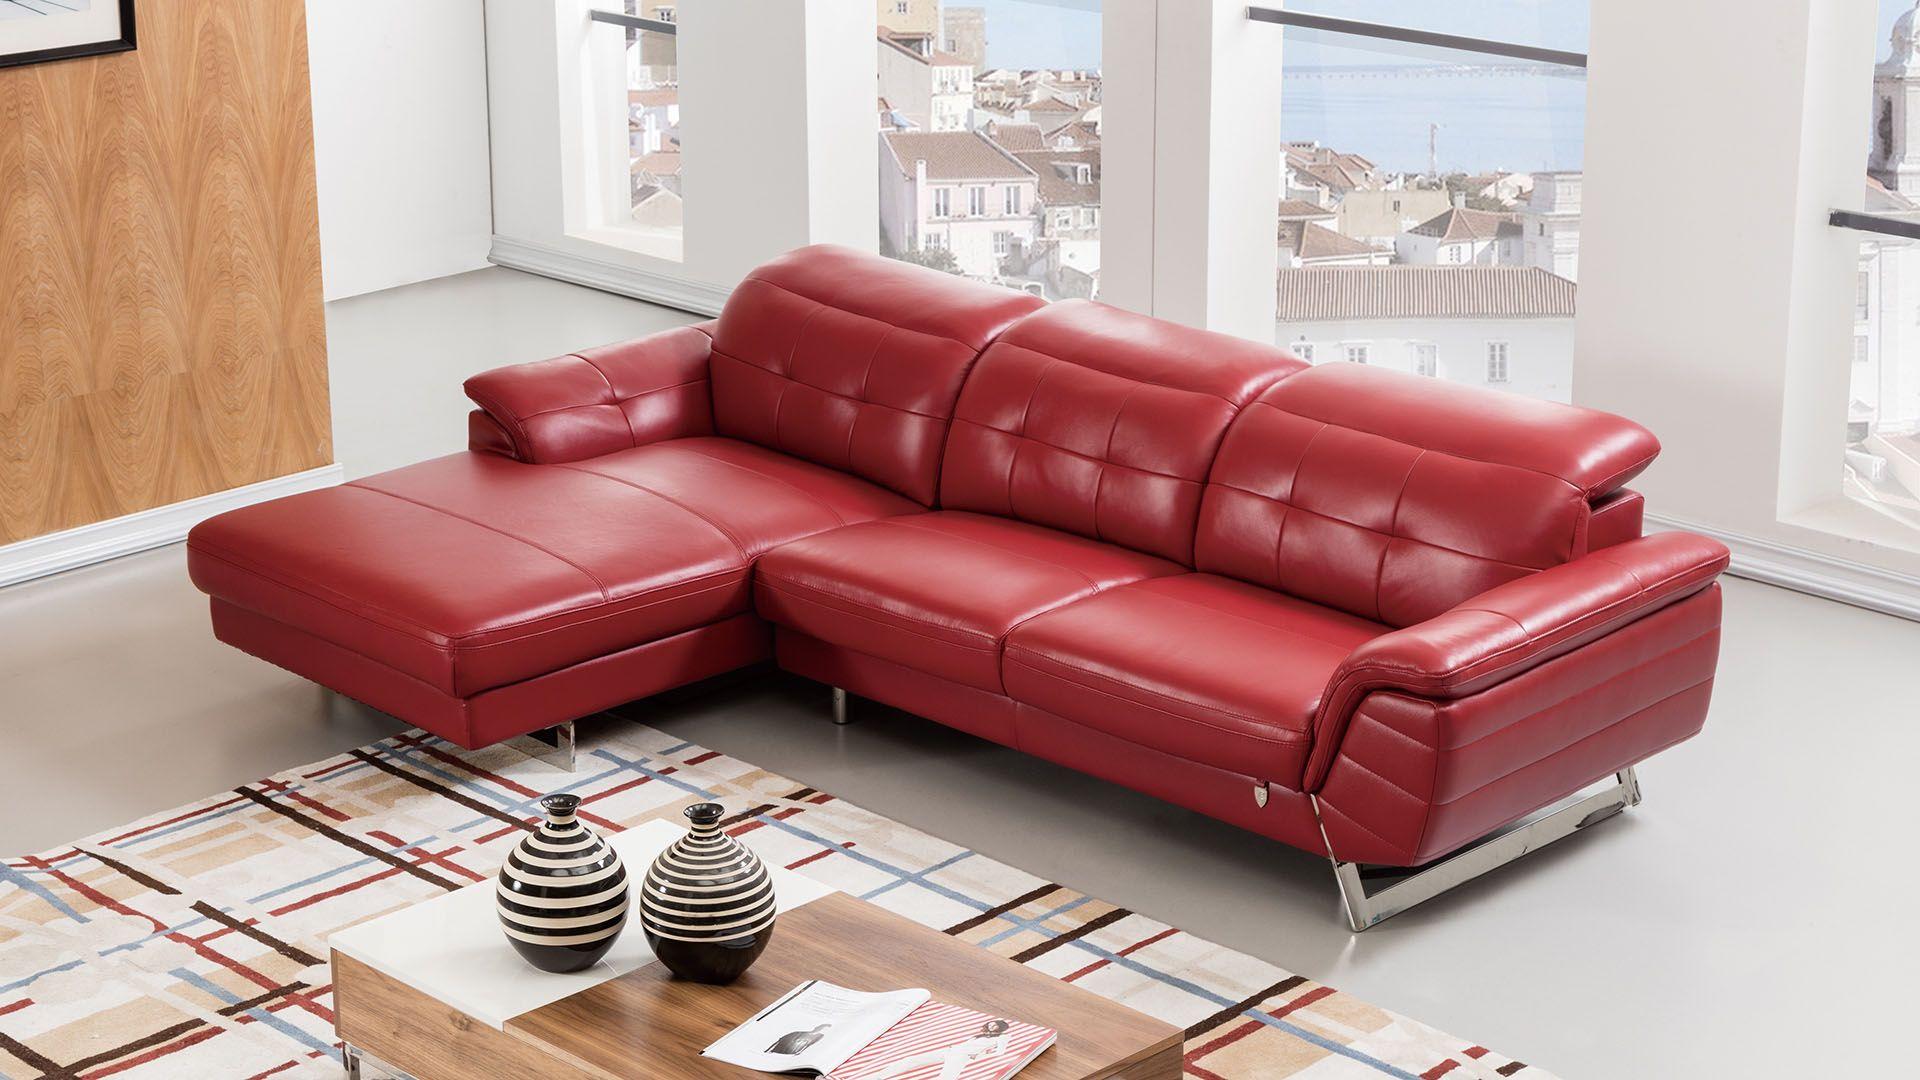 Contemporary, Modern Sectional Sofa EK-L085-RED EK-L085L-RED in Red Italian Leather